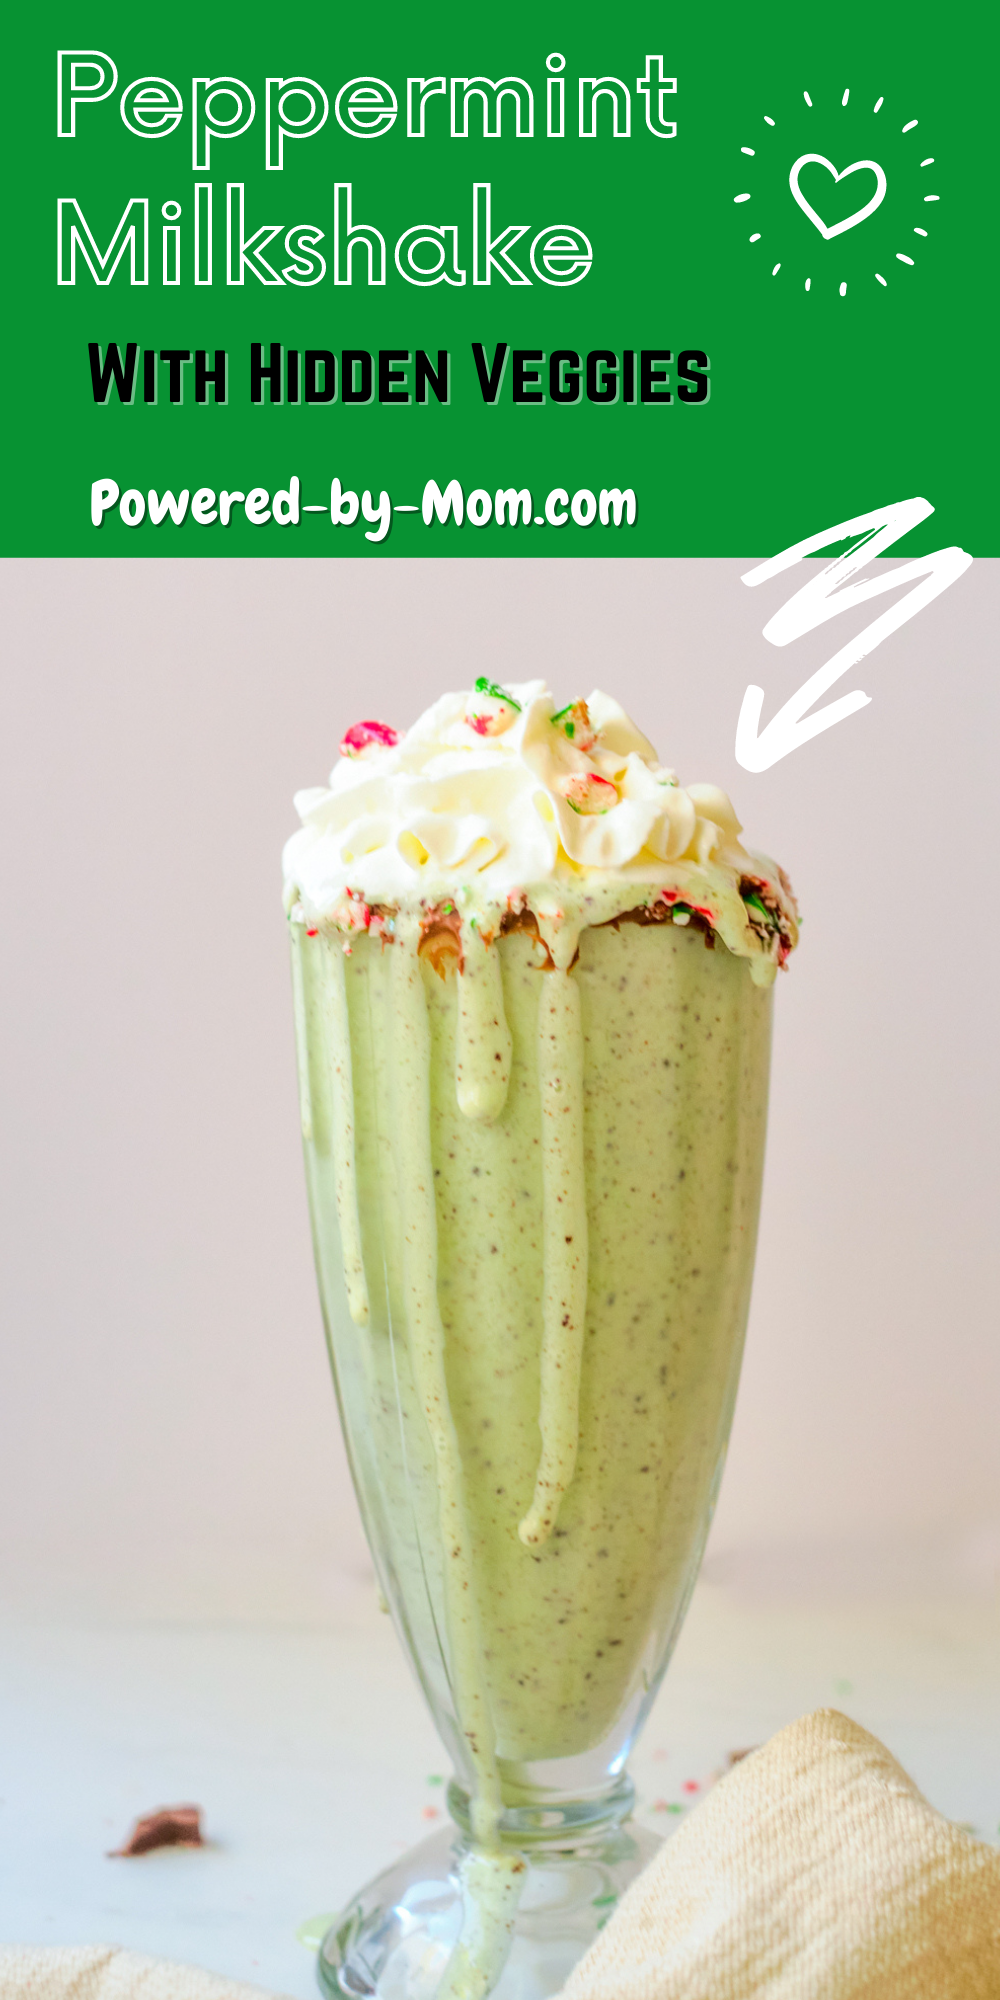 Enjoy this peppermint milkshake with a festive touch of a chocolate-rimmed glass with crushed candy canes with the option of hidden veggies.